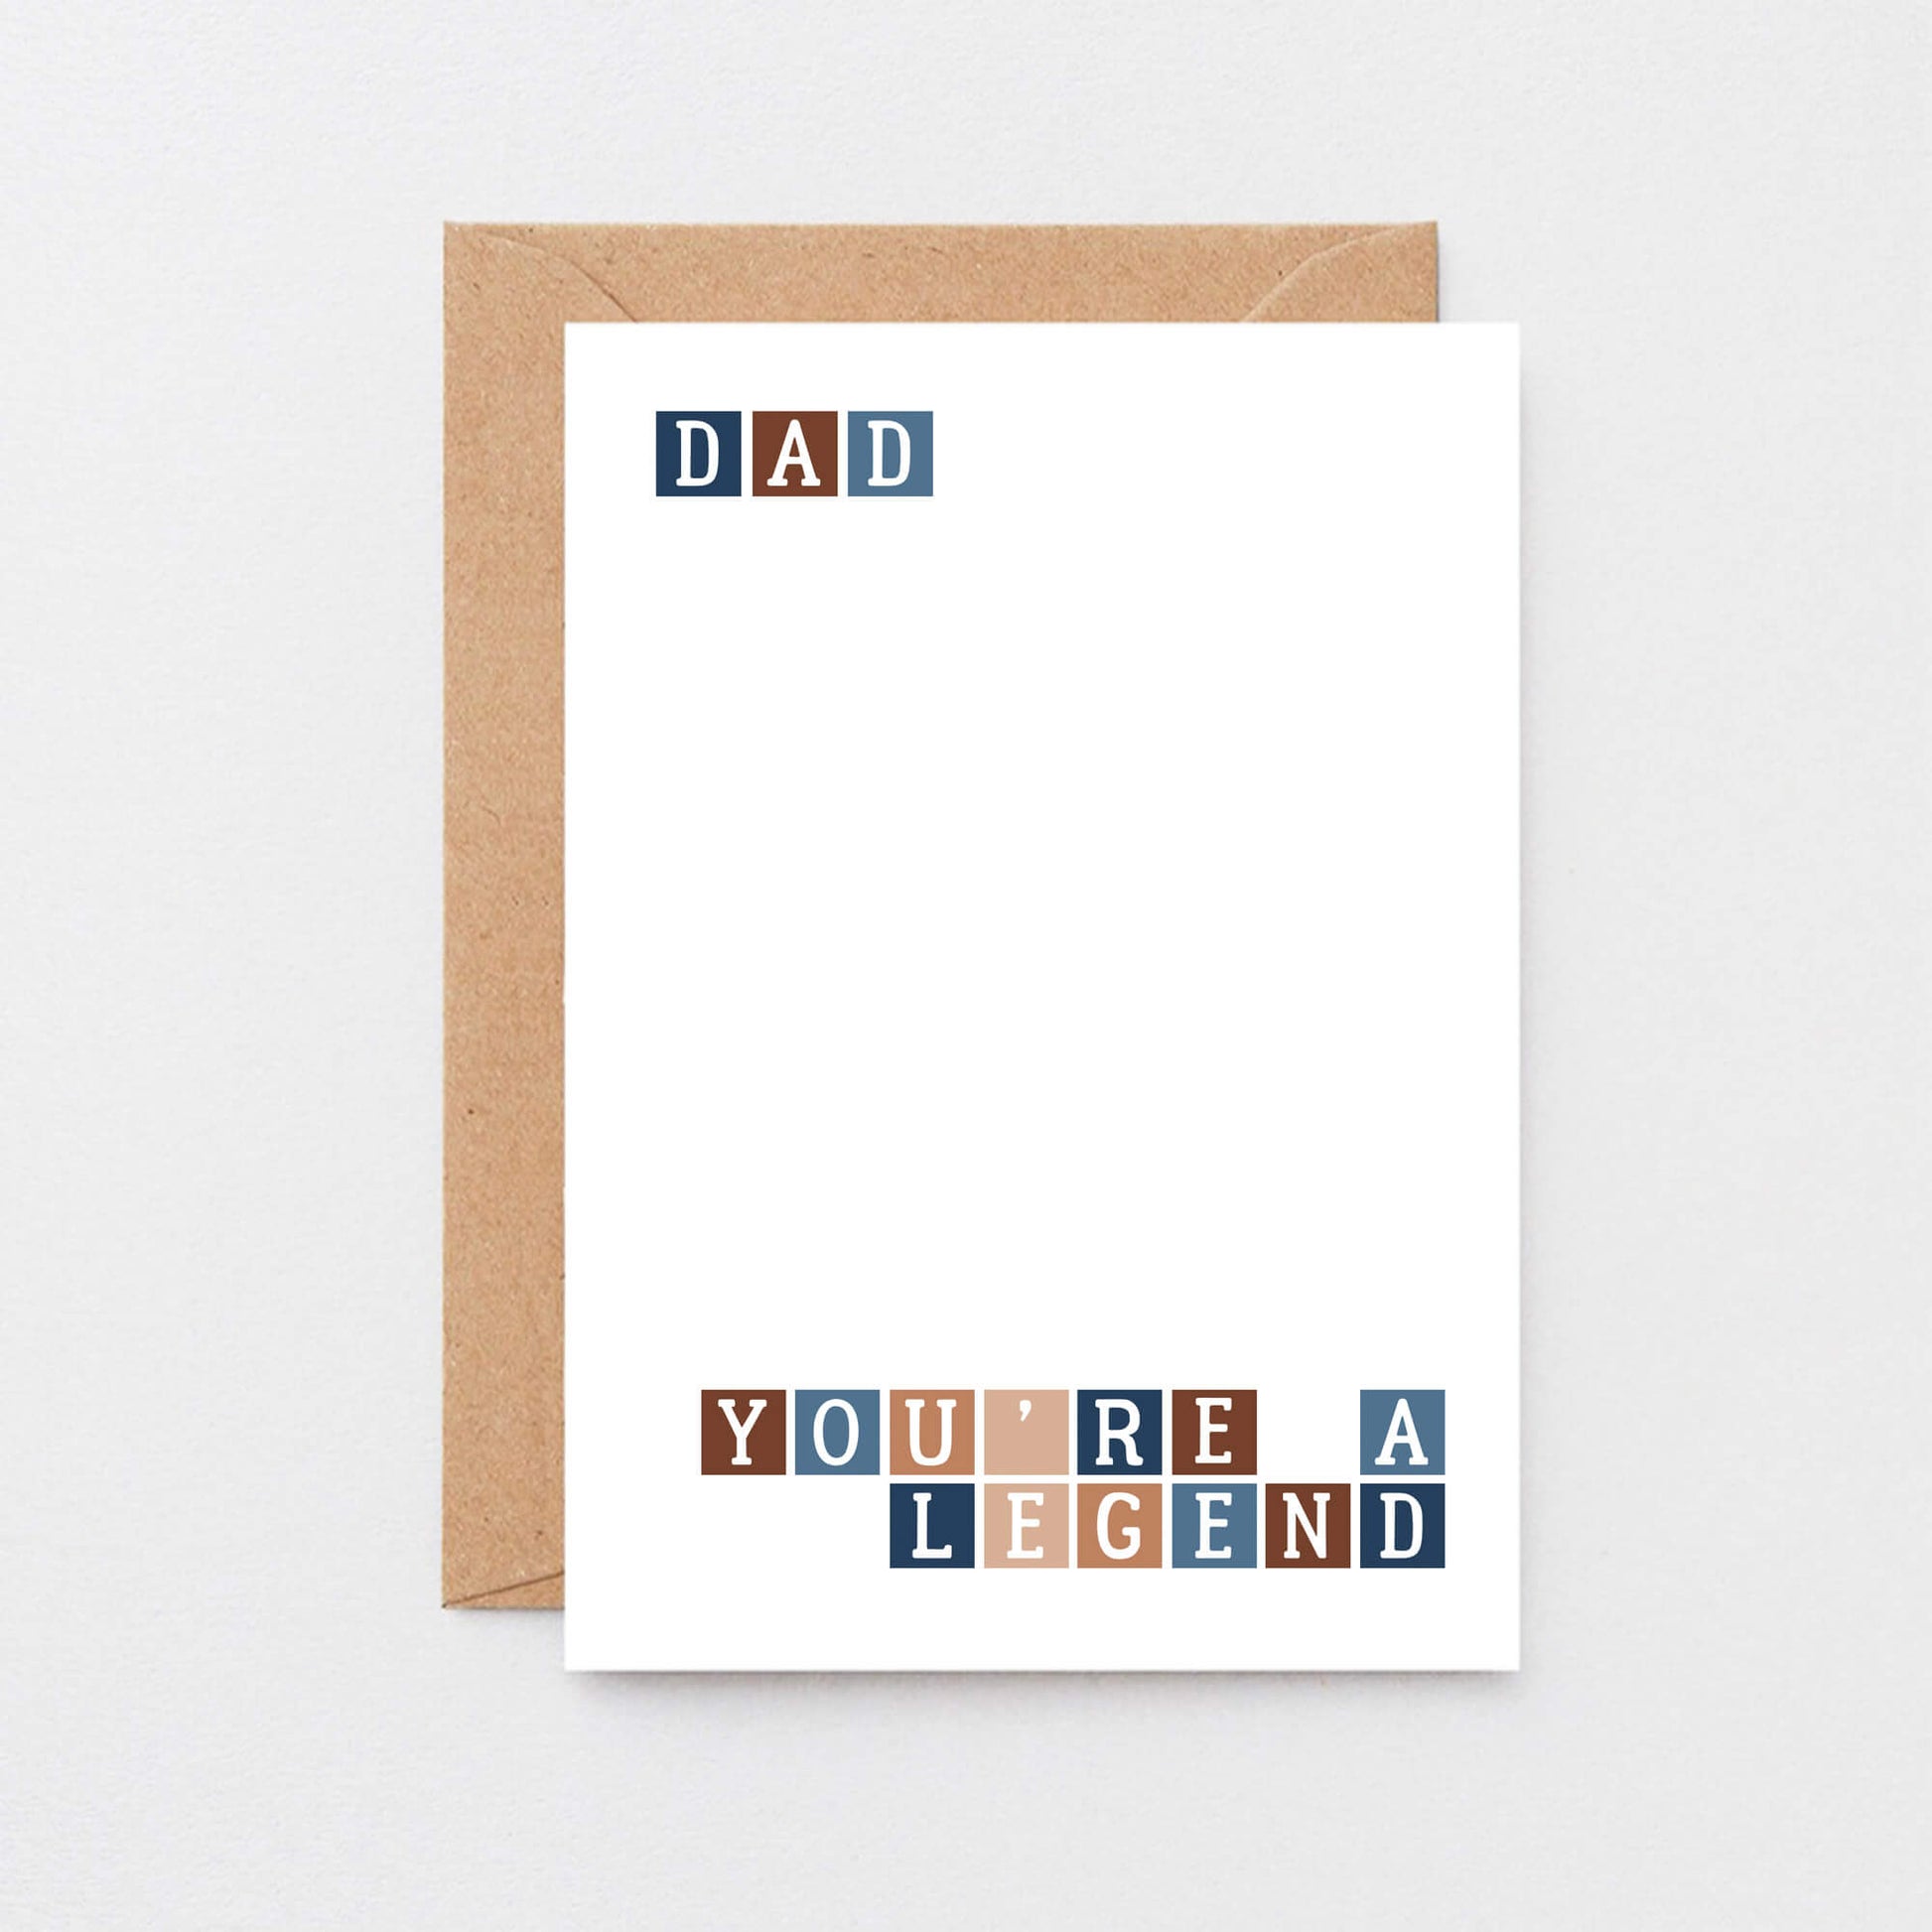 Dad Card by SixElevenCreations. Reads Dad you're a legend. Product Code SE0262A6